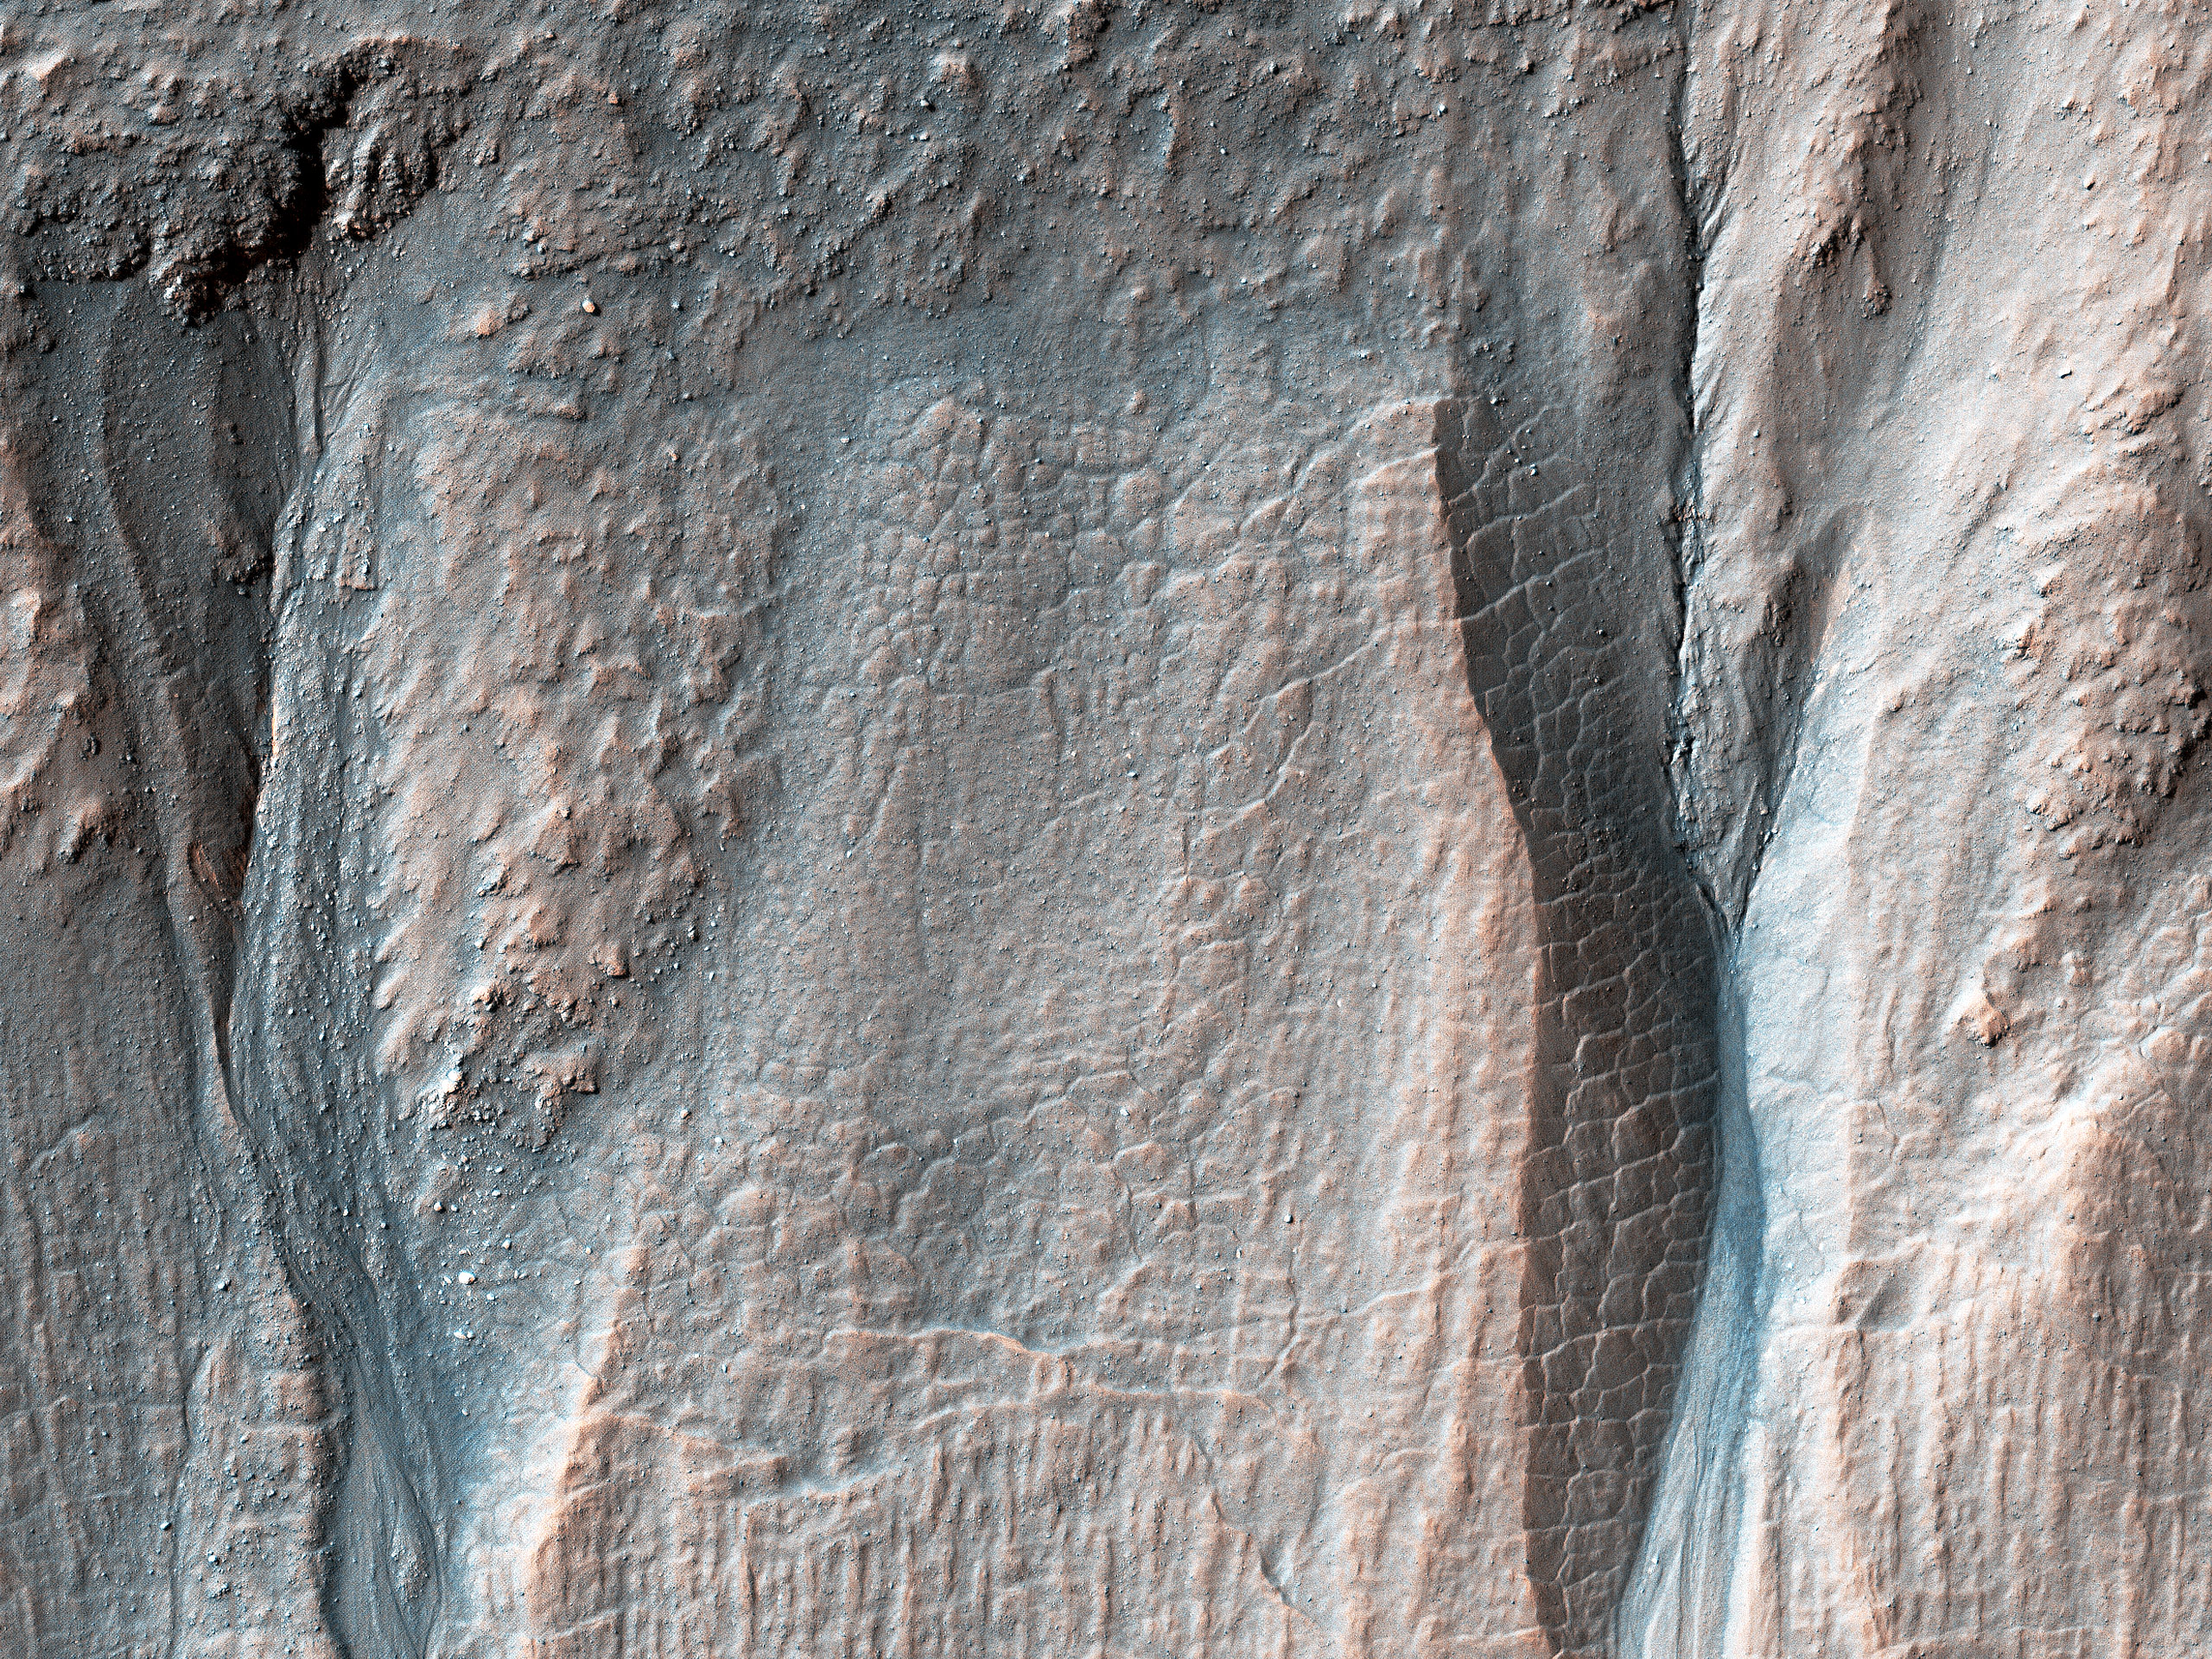 Crater Gullies at Multiple Elevations